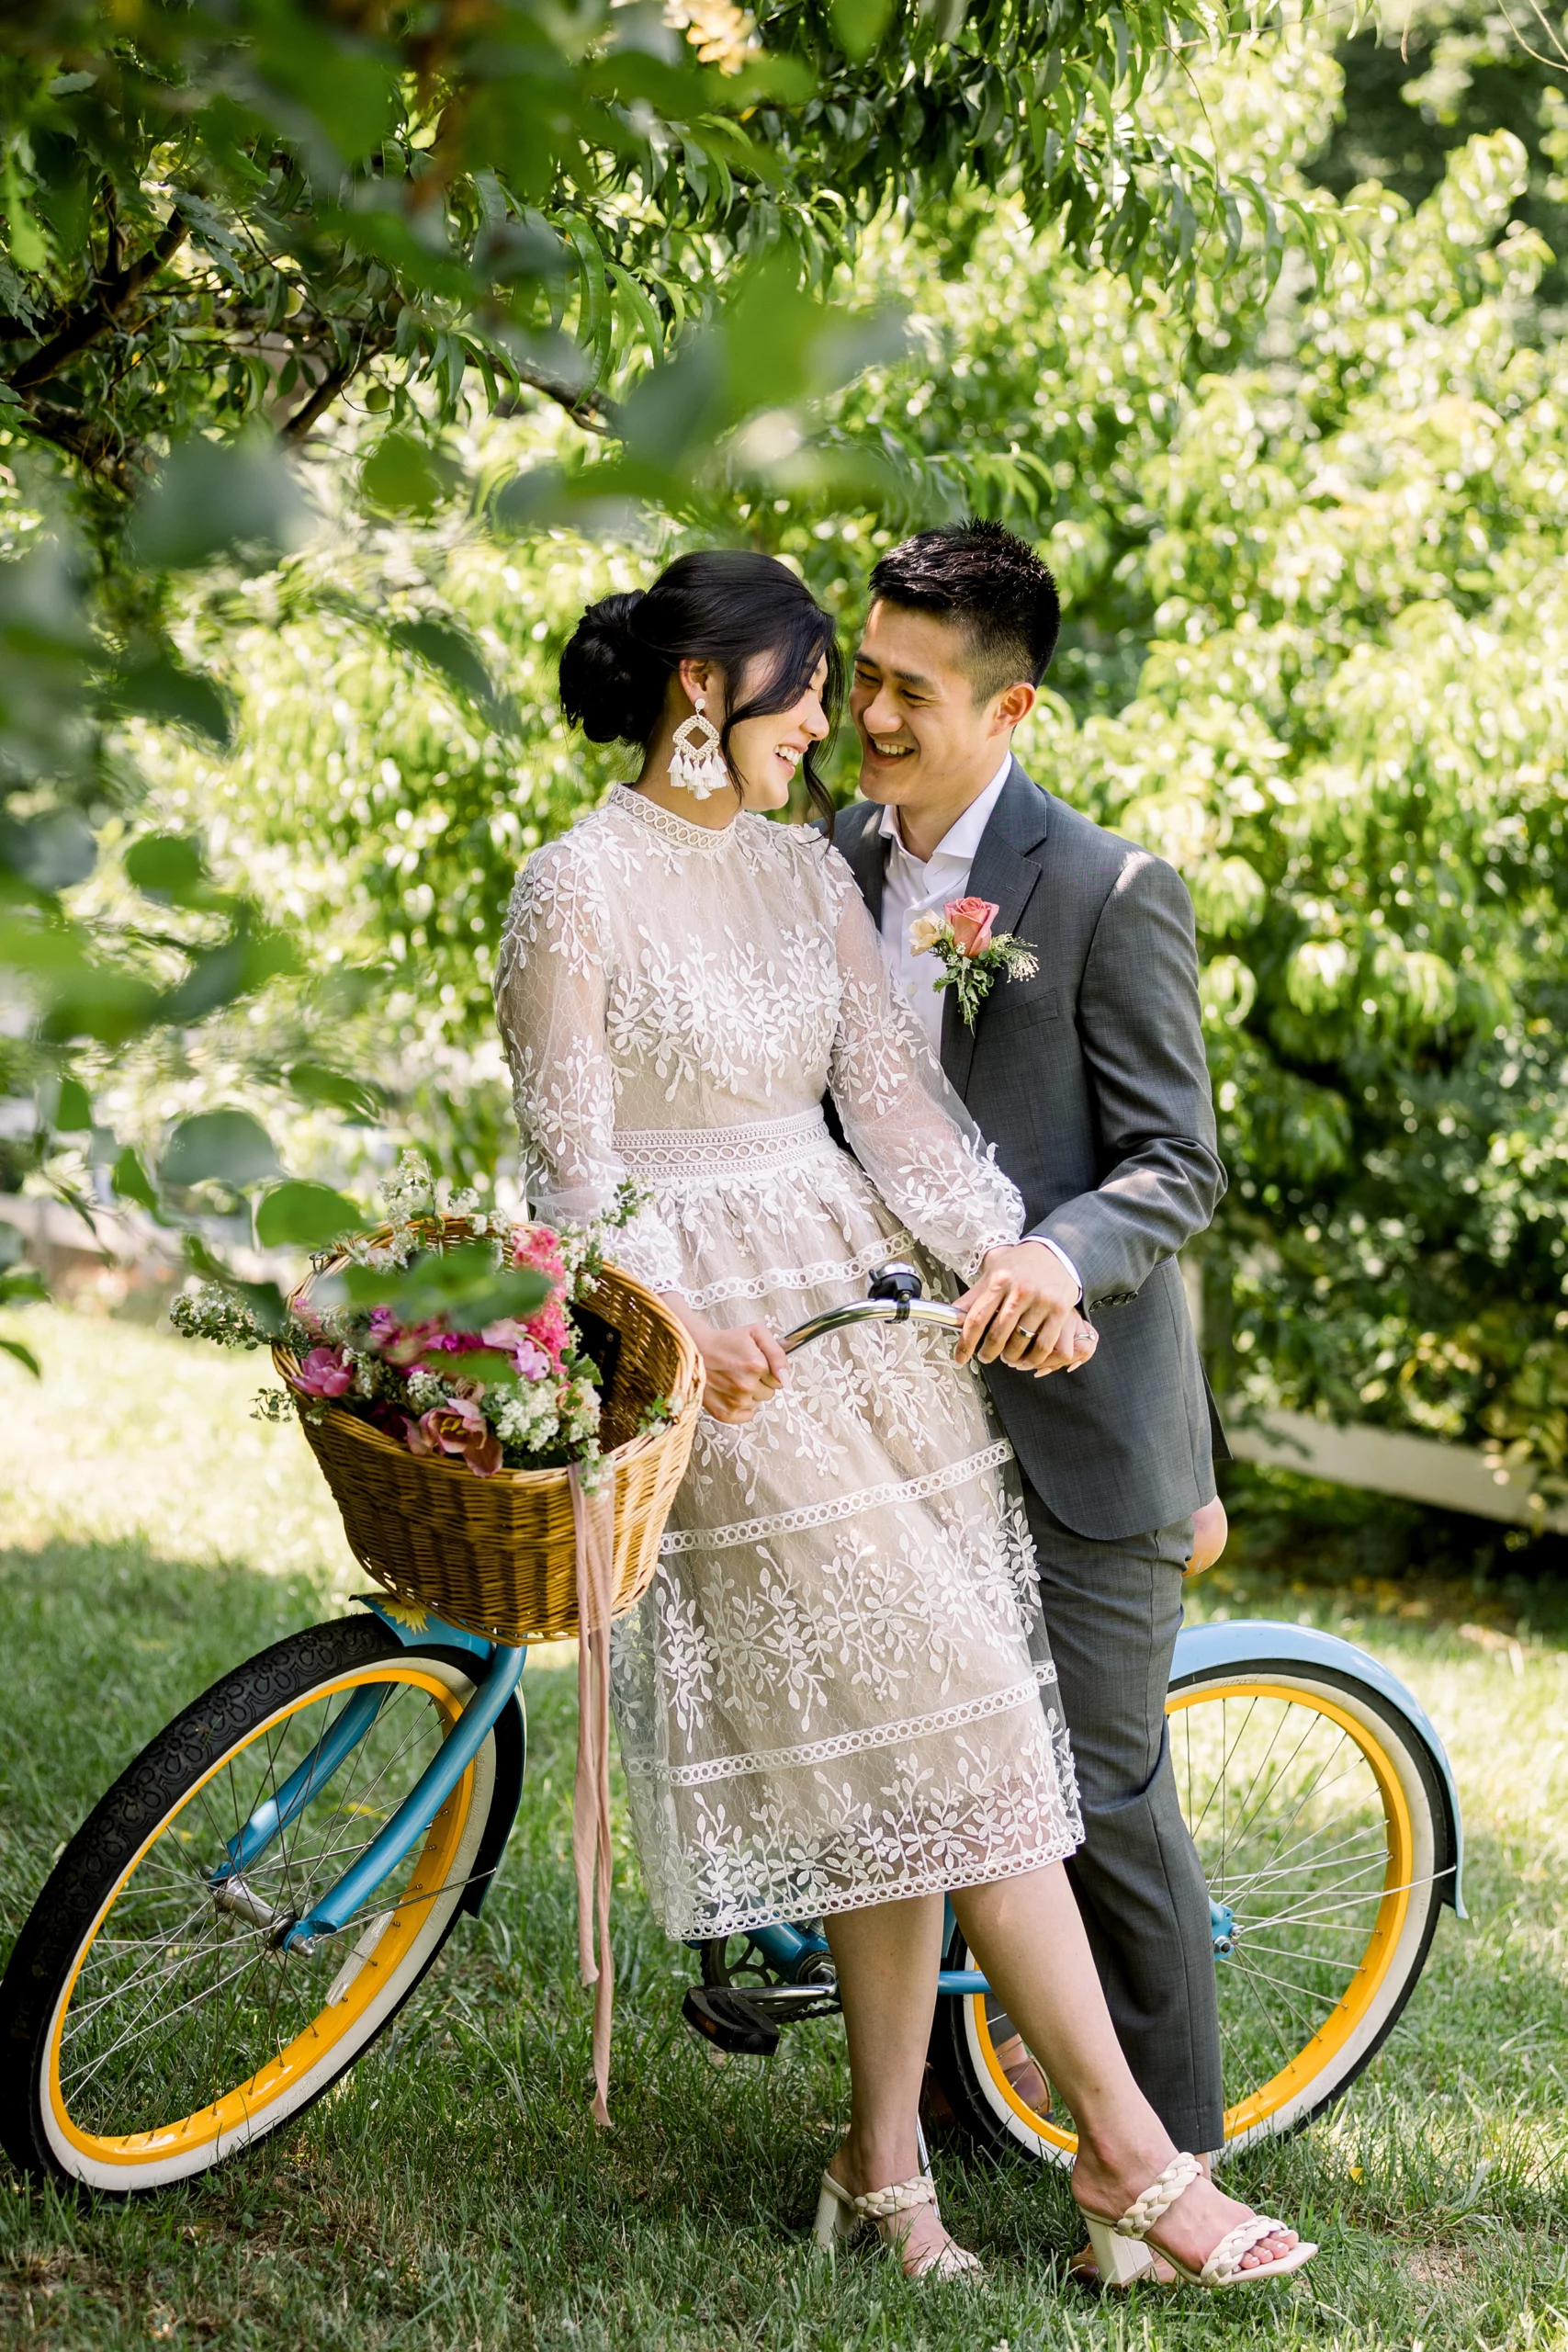 bride and groom on a bike in a garden